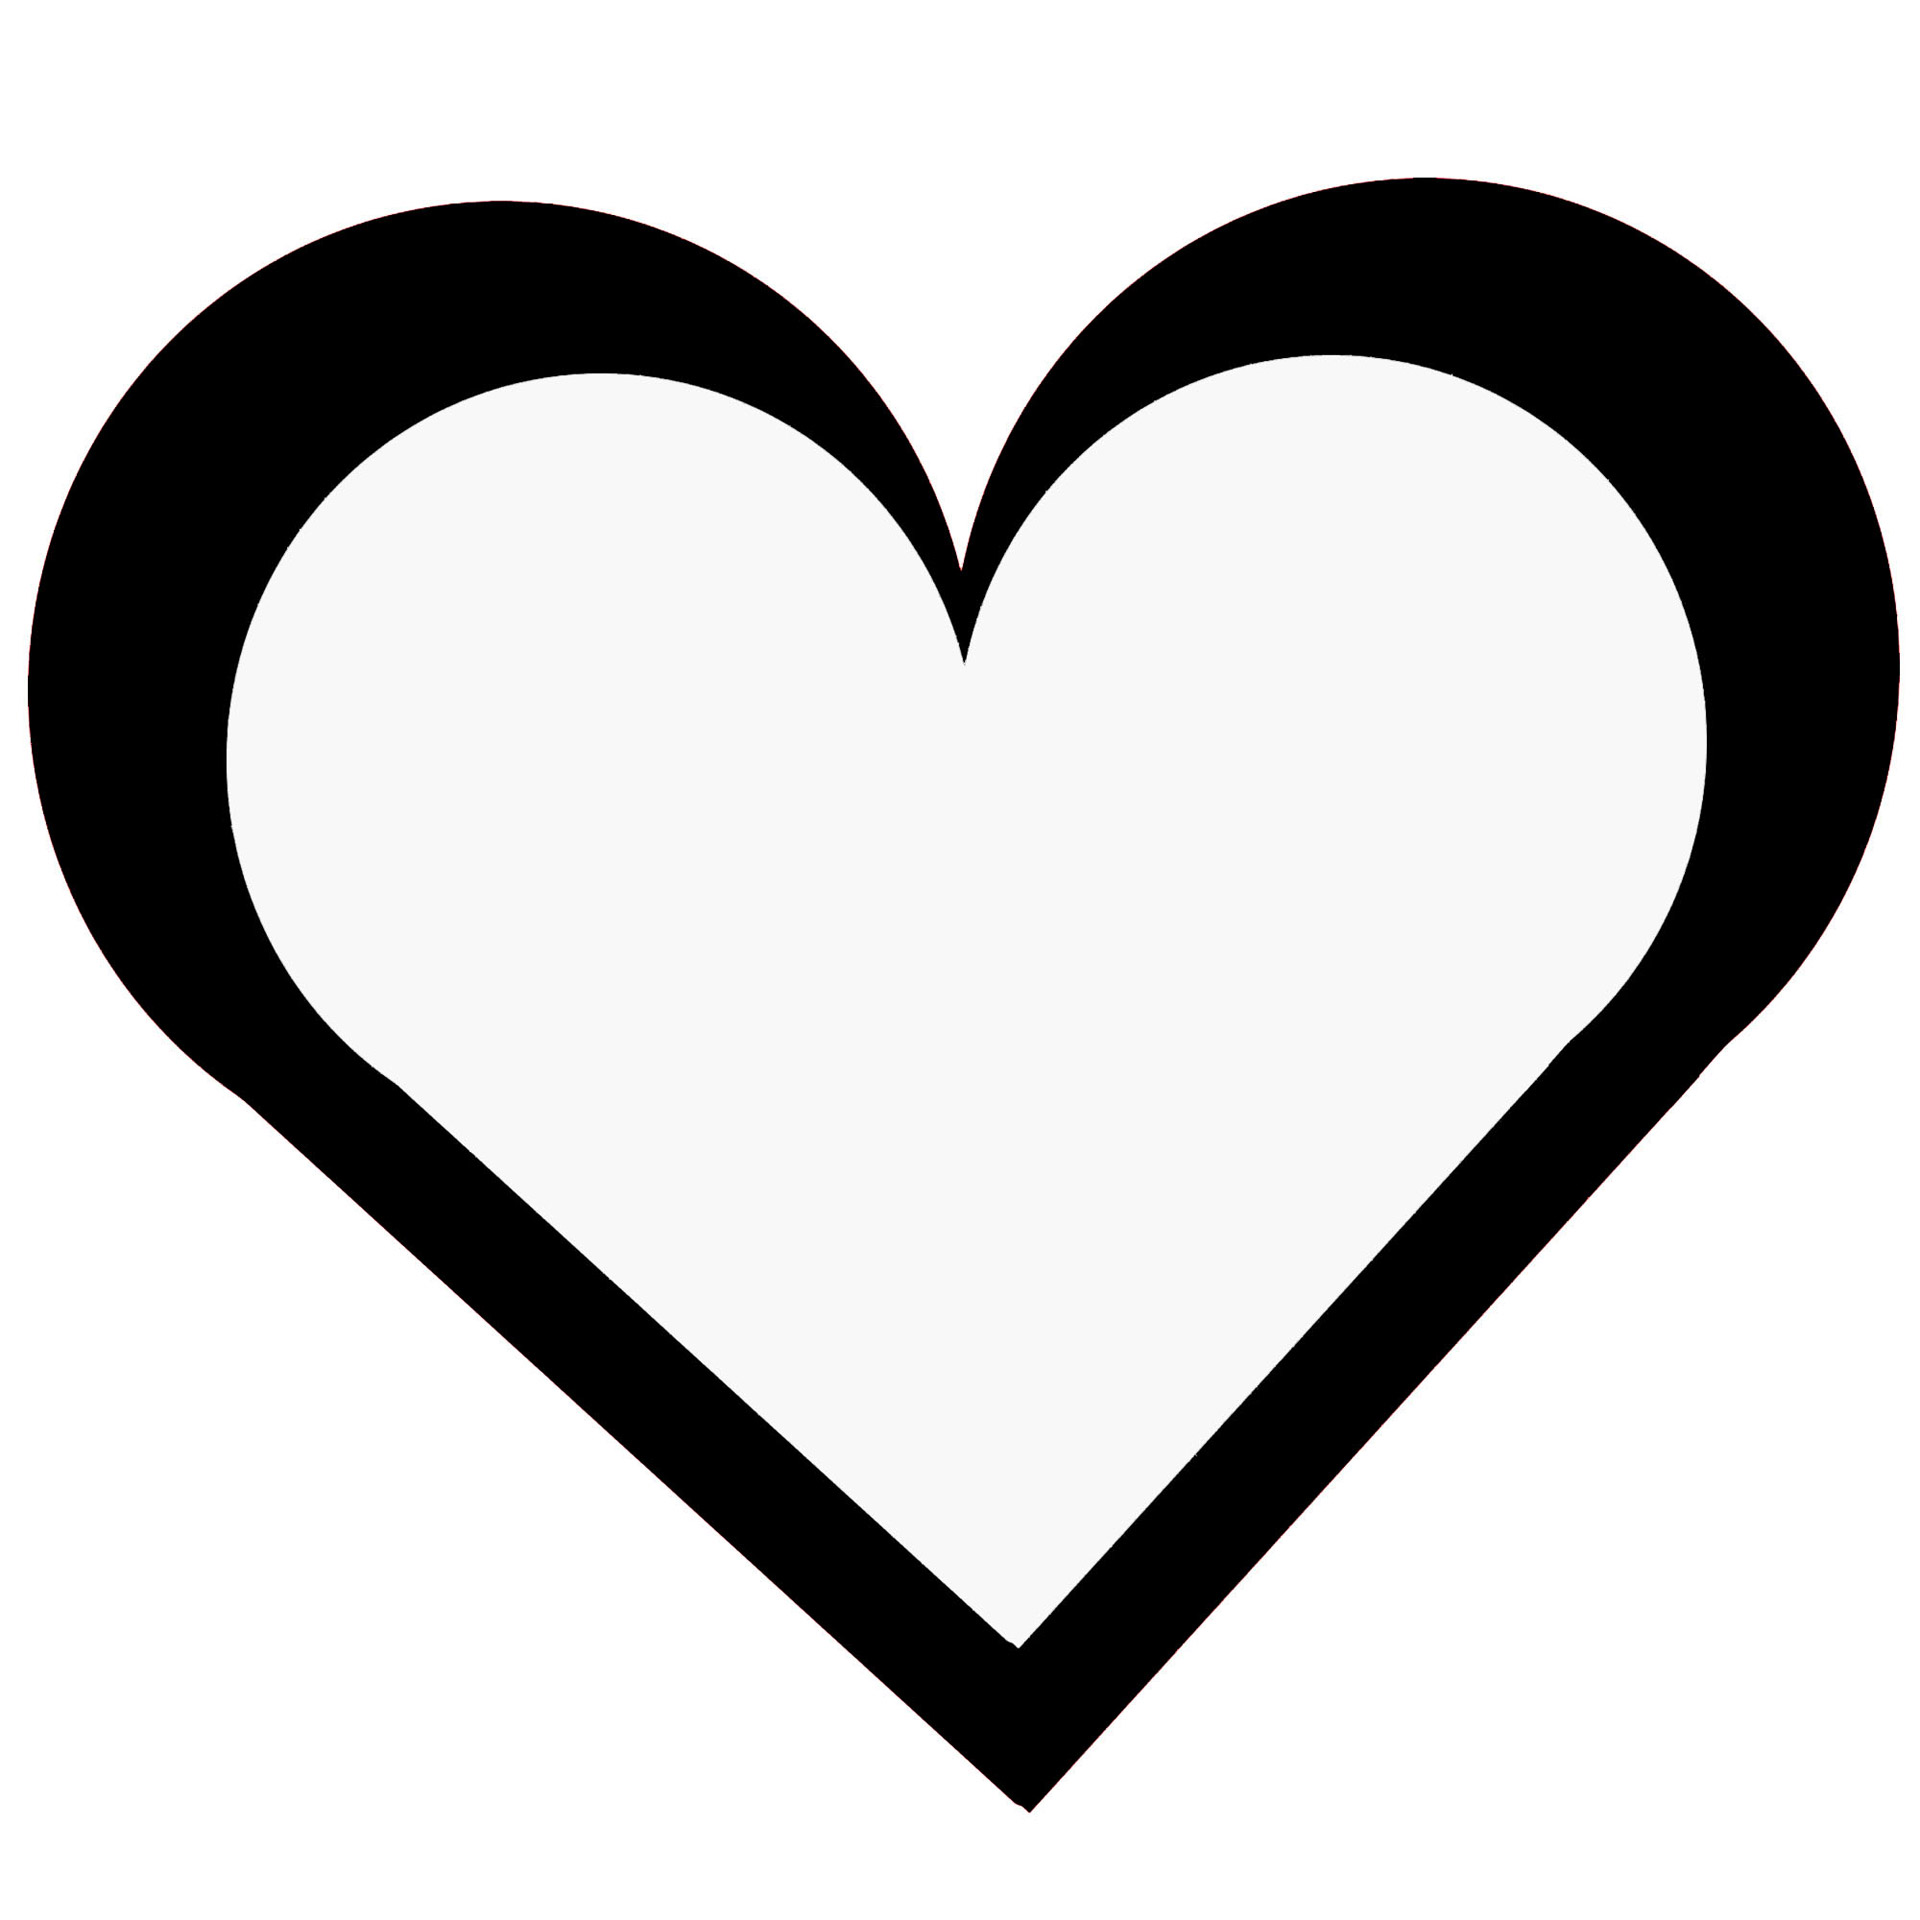 Black And White Heart Outline Clipart